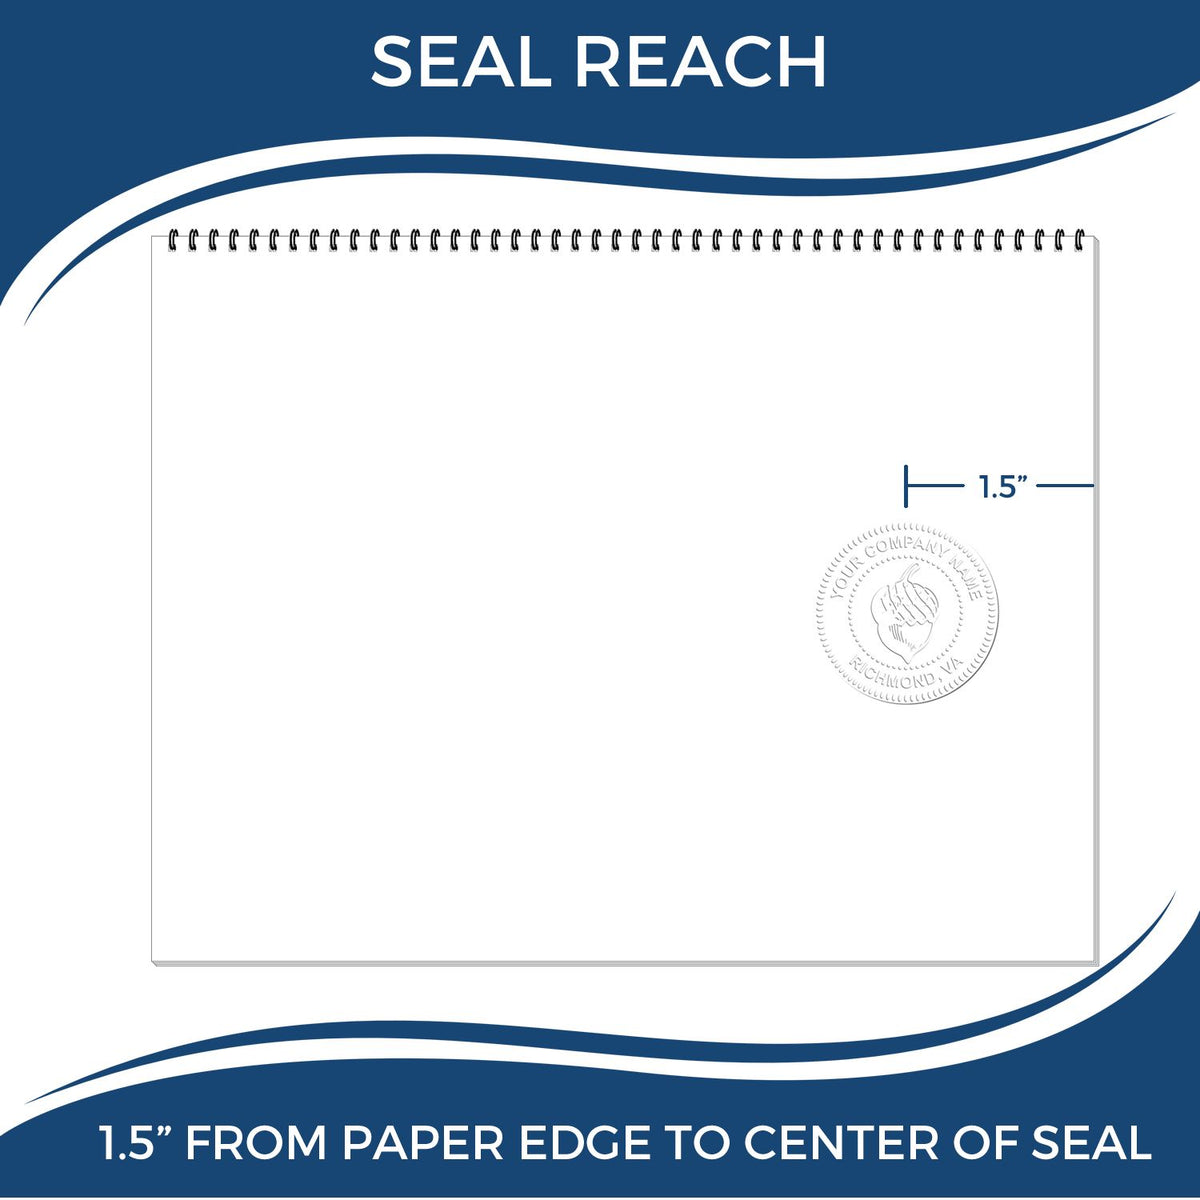 An infographic showing the seal reach which is represented by a ruler and a miniature seal image of the Soft New York Professional Engineer Seal